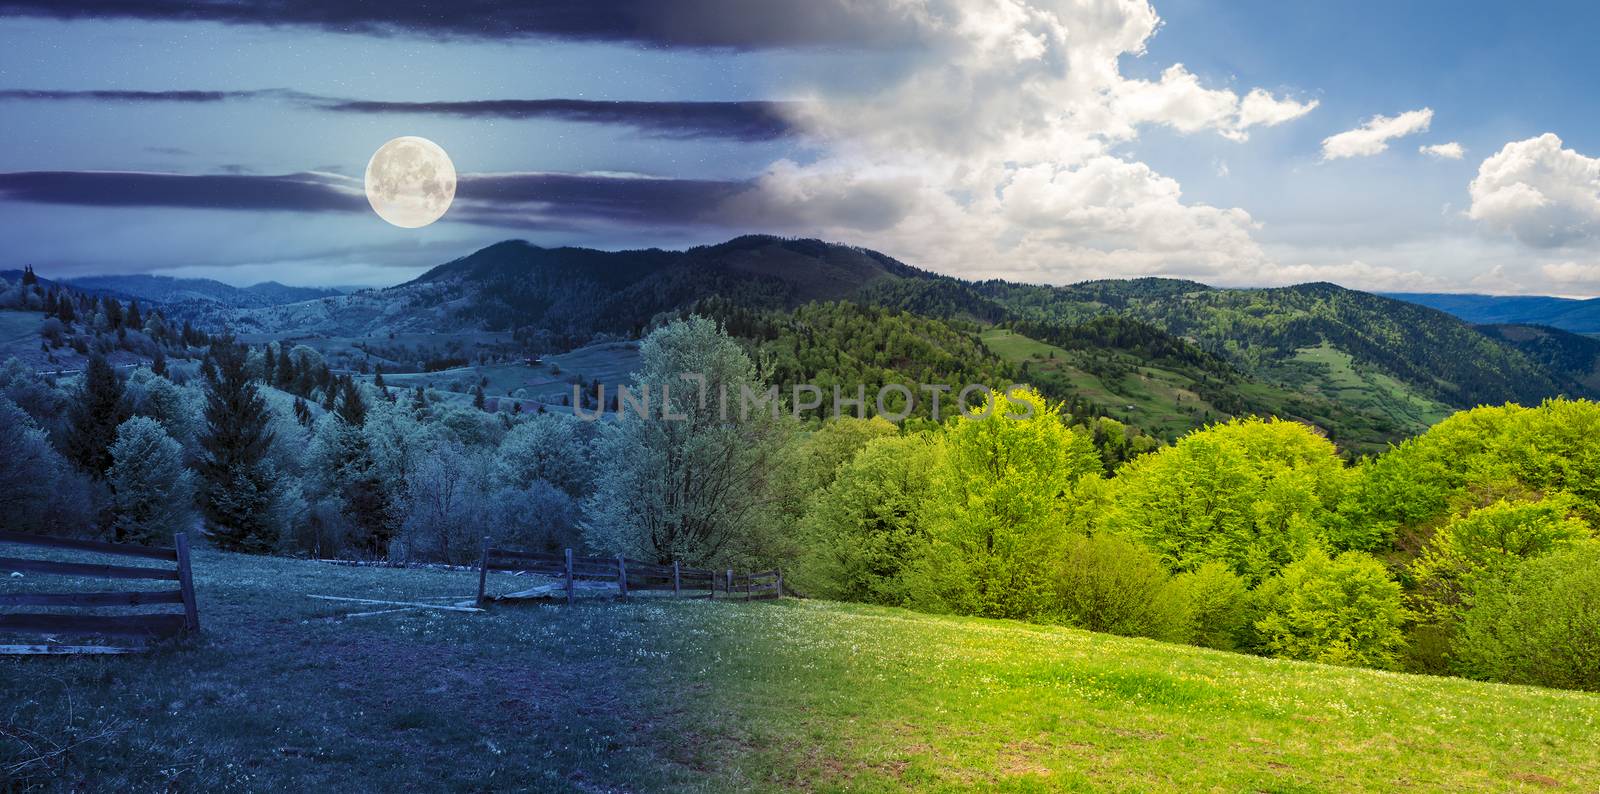 day and night summer panorama landscape collage. fence near the meadow path on the hillside. forest in fog on the mountain with full moon